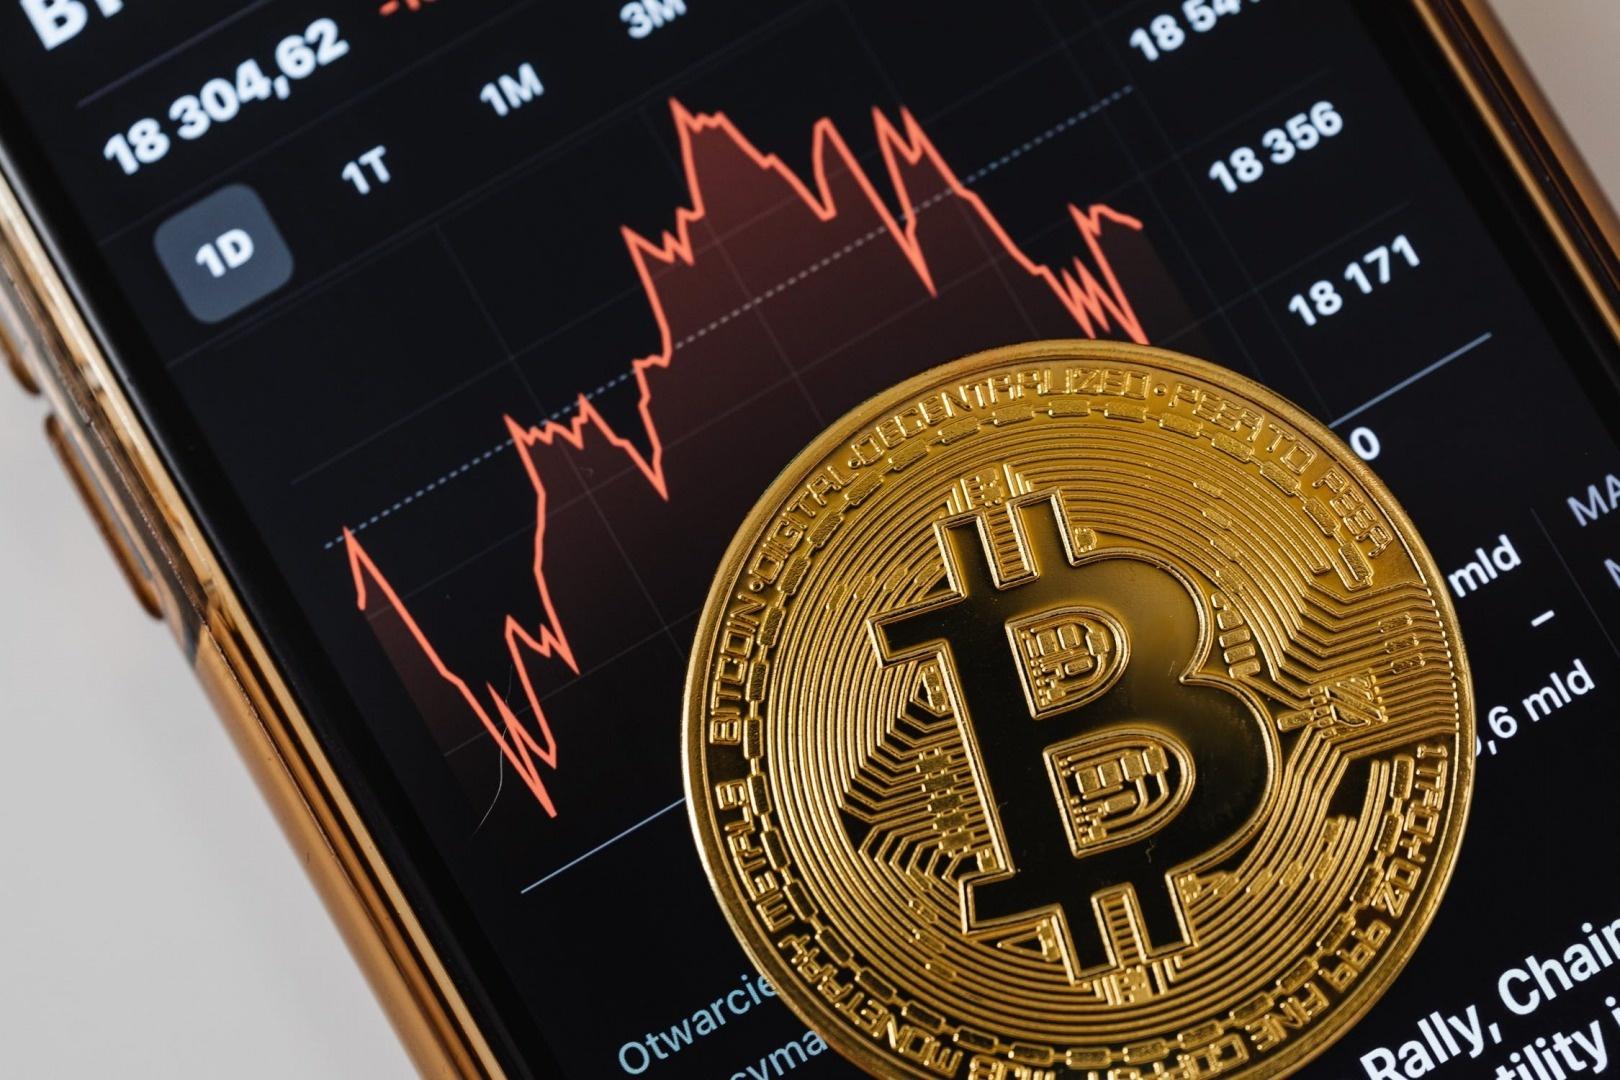 Bitcoin Surges to New Record Ahead of Coinbase IPO